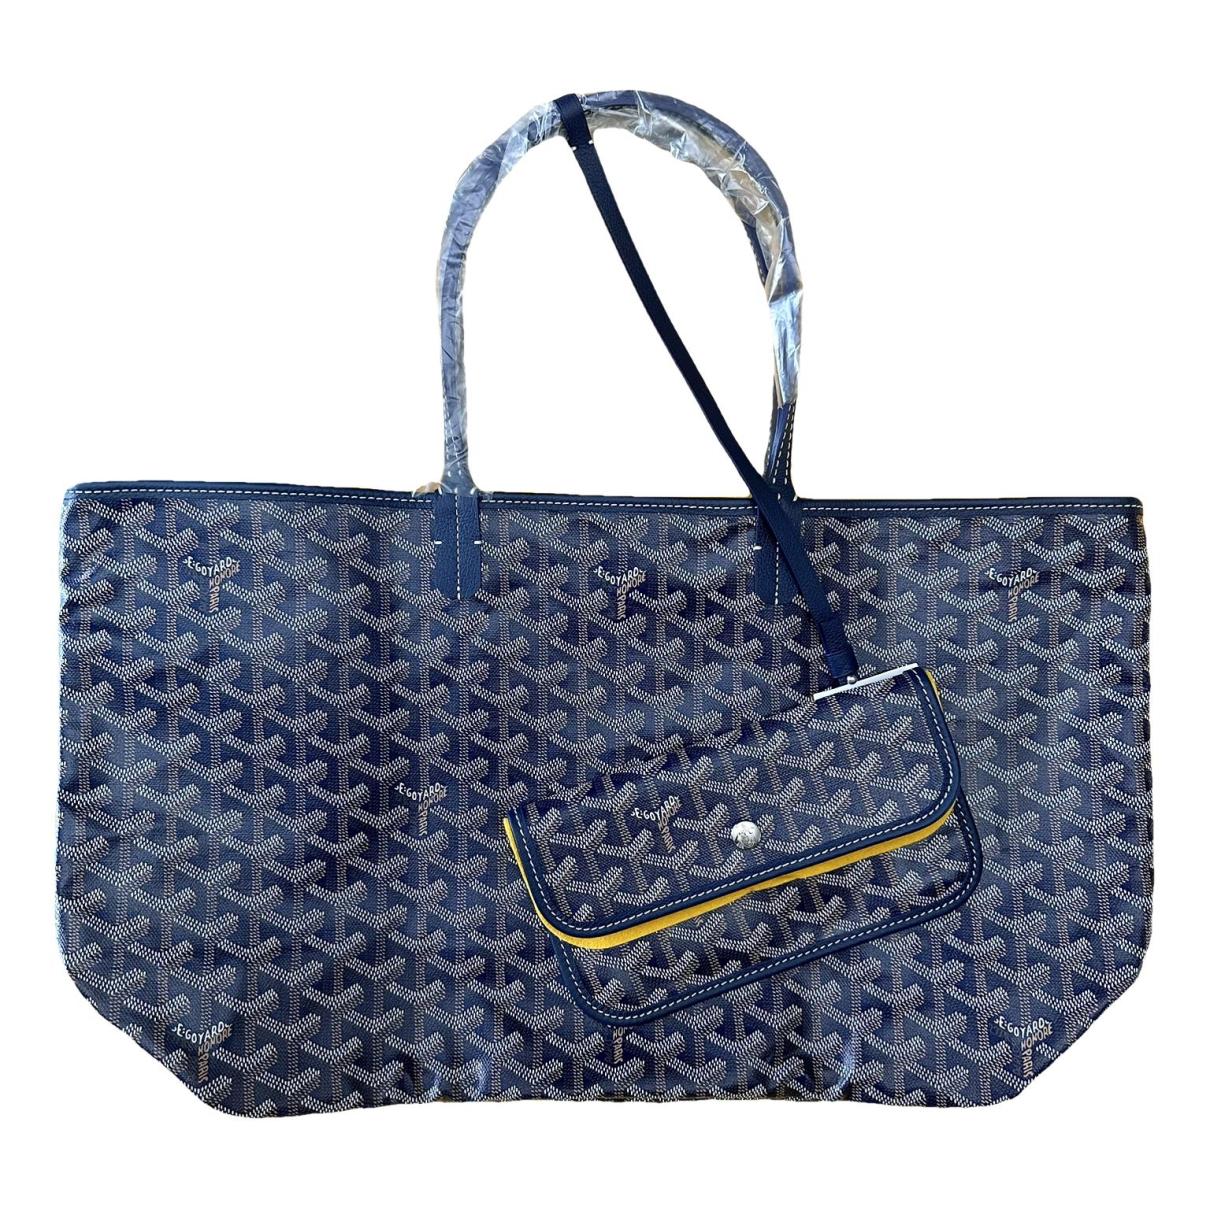 Saint-louis leather tote Goyard Navy in Leather - 35918107